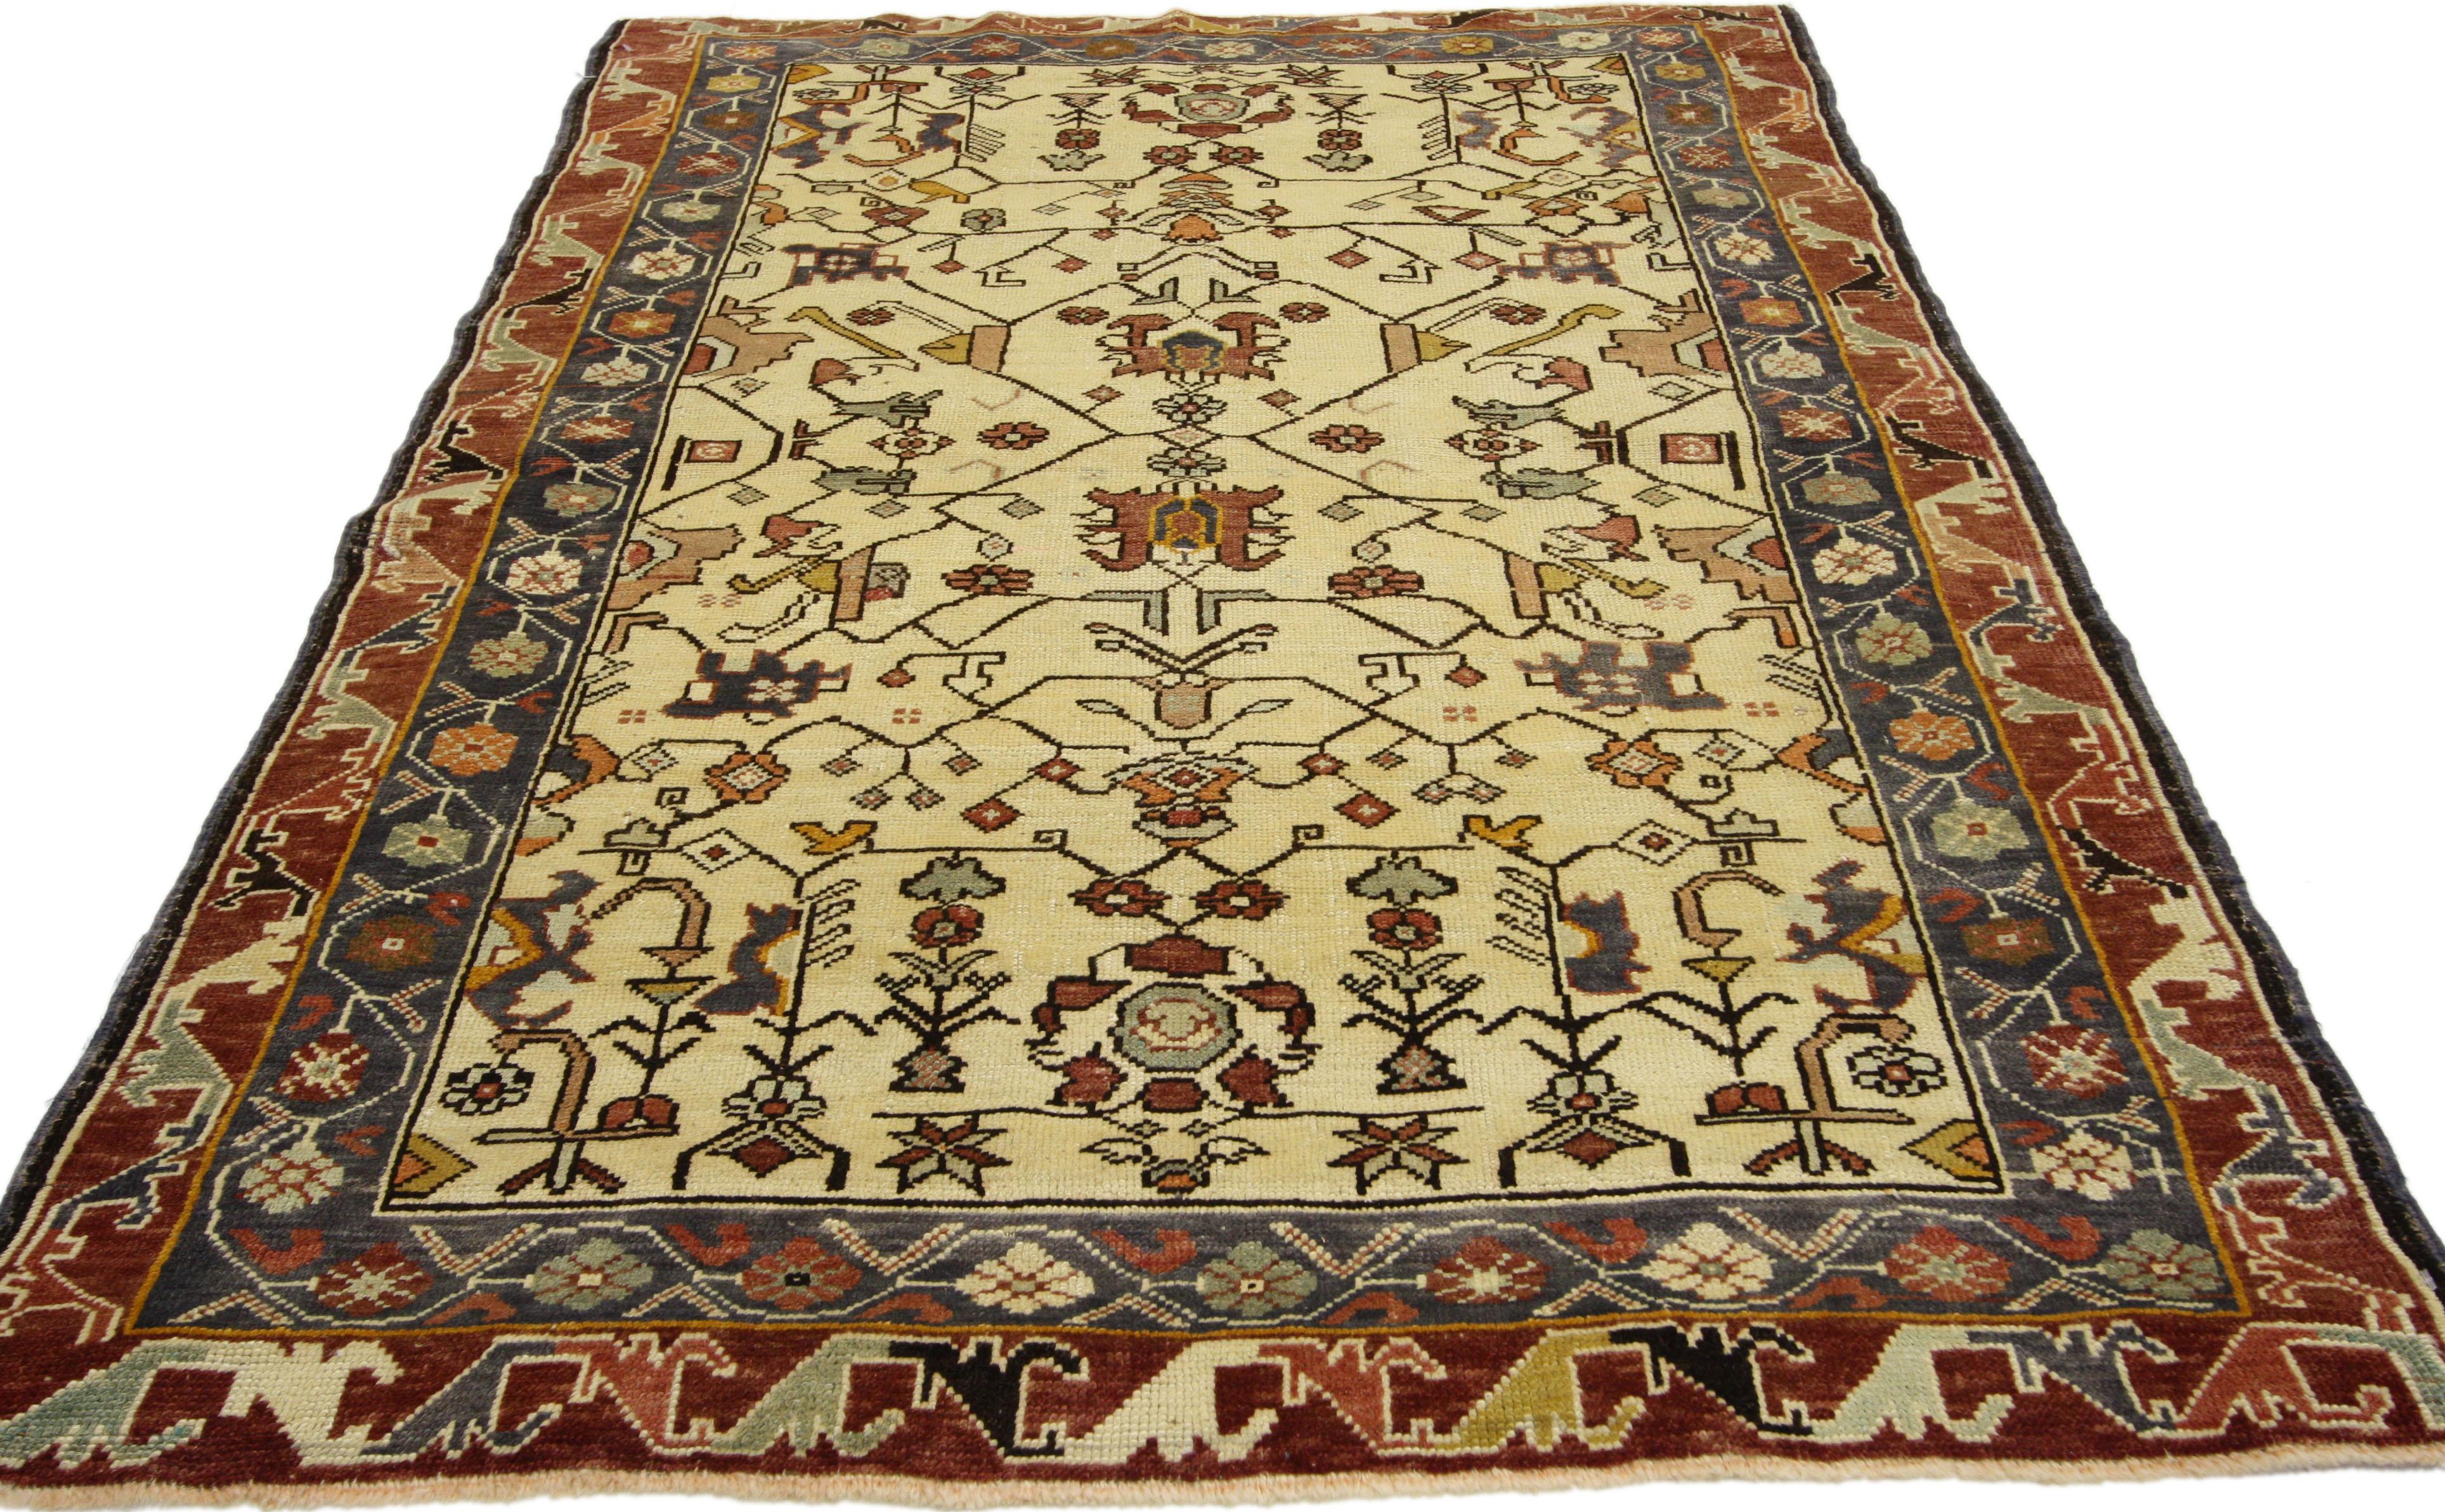 73781, vintage Turkish Oushak rug with Arts & Crafts style, Entry or Foyer Accent rug. This hand knotted wool vintage Turkish Oushak rug features an all-over floral lattice pattern spread across an abrashed creamy-beige field. Lovely palmettes,